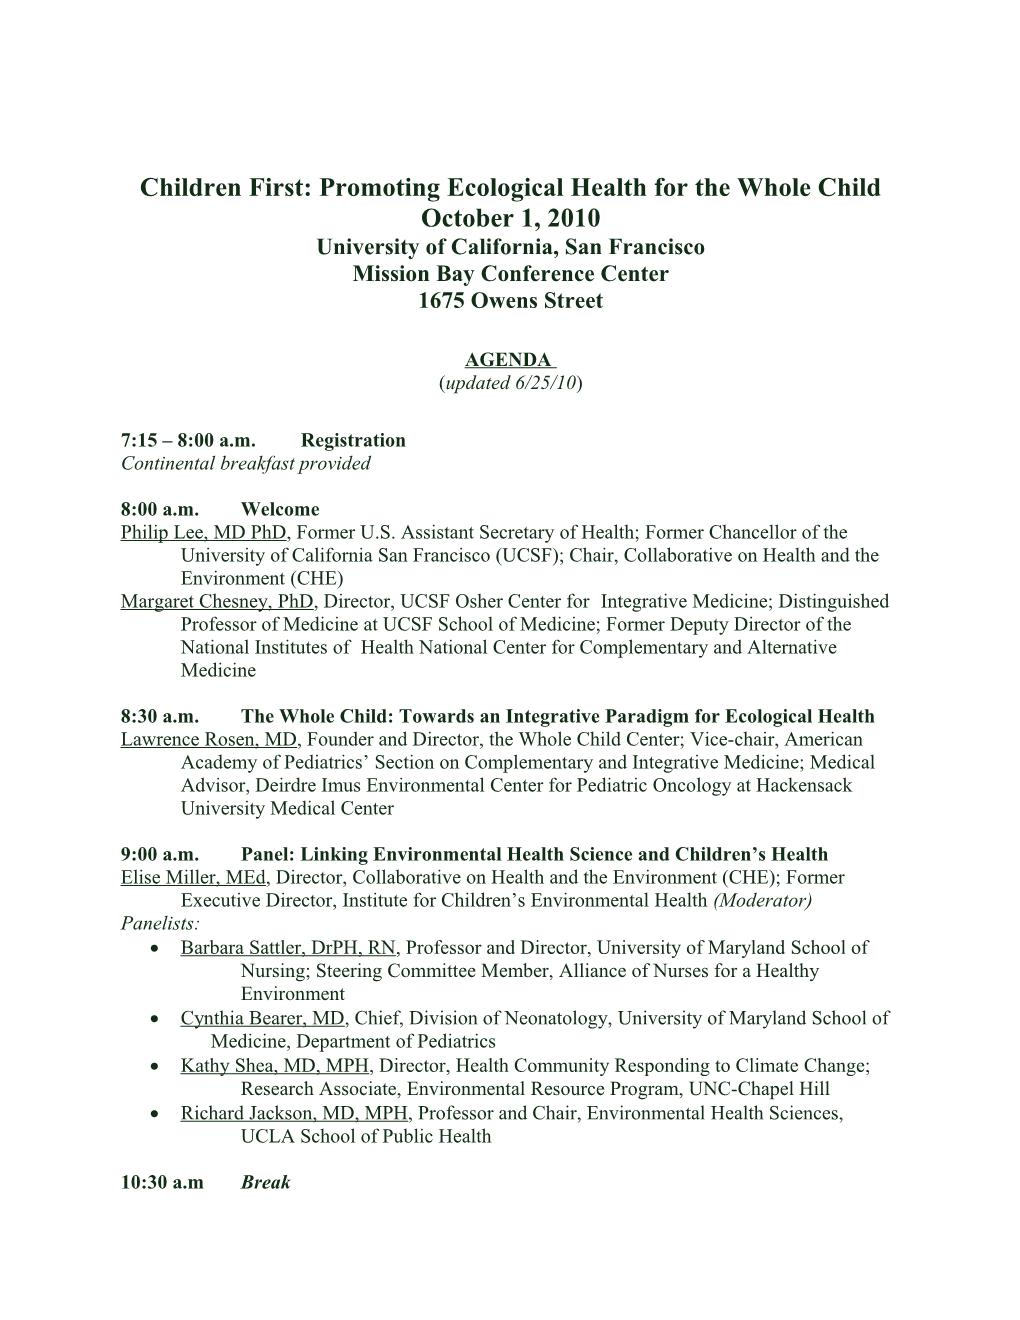 Children First: Promoting Ecological Health for the Whole Child